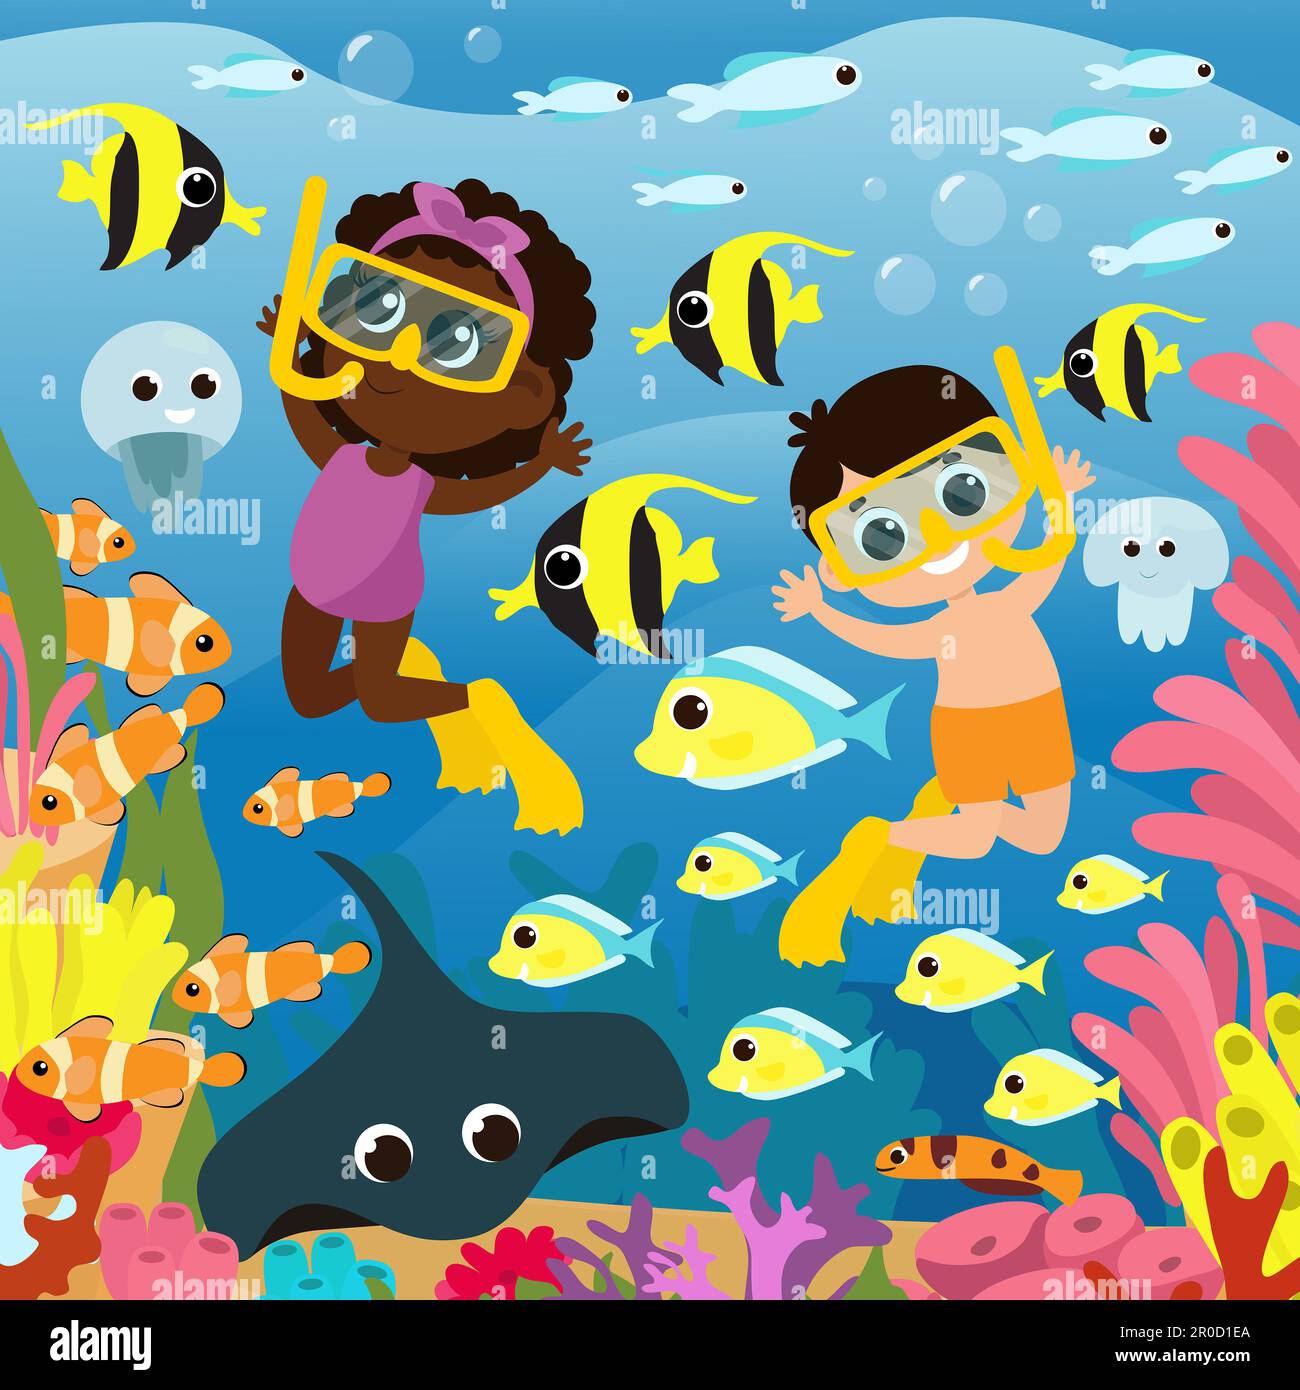 Under the water near the coral reefs children swim divers along with fish, jellyfish and stingray. Picture for children's puzzles underwater sea world Stock Photo